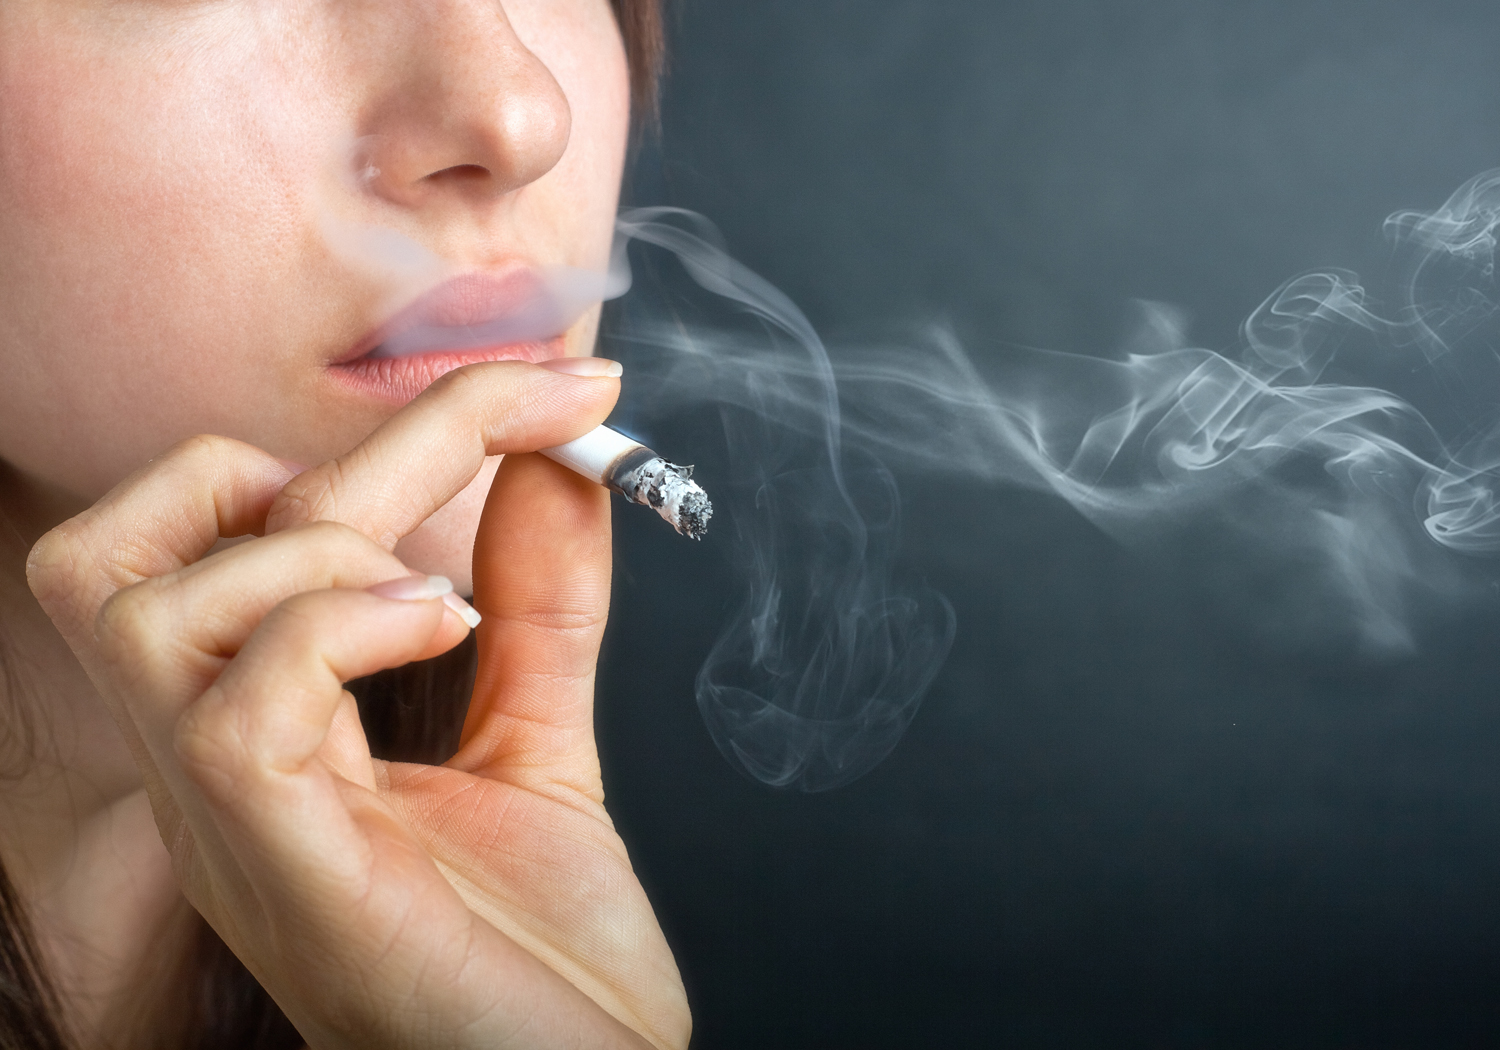 Woman with Cigarette Exhaling Smoke on a Dark Background